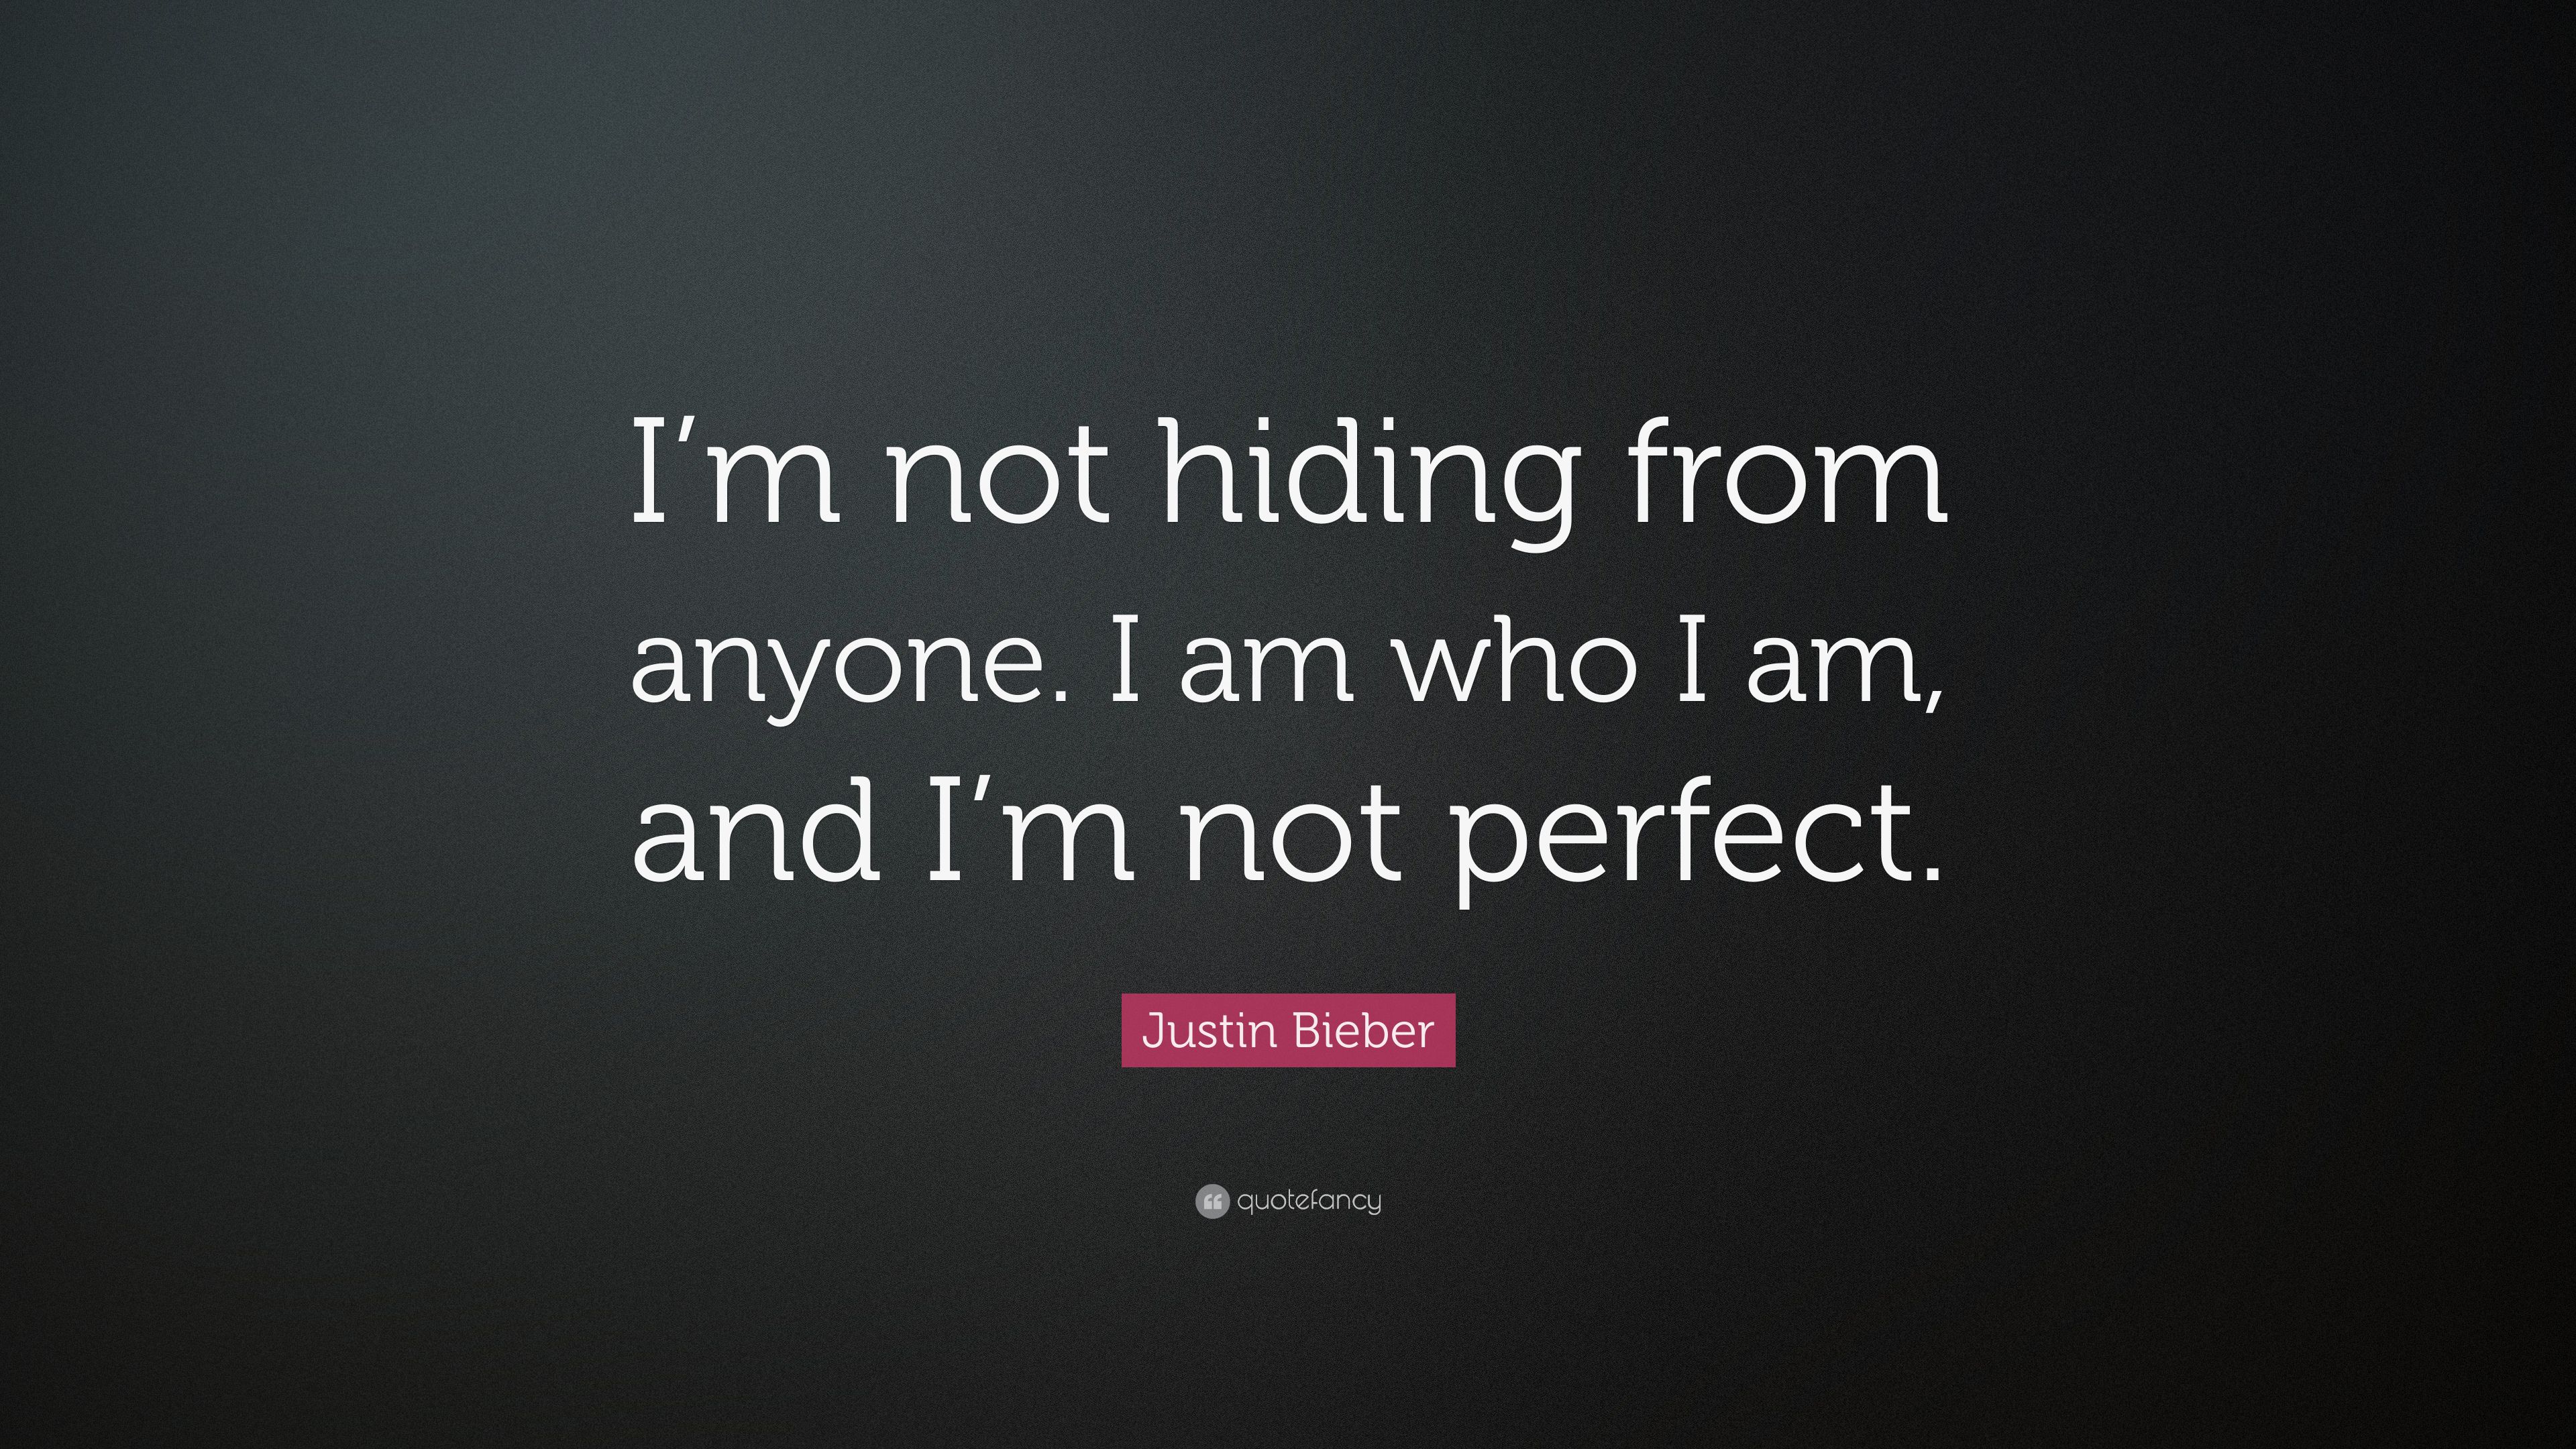 Justin Bieber Quote: “I'm not hiding from anyone. I am who I am